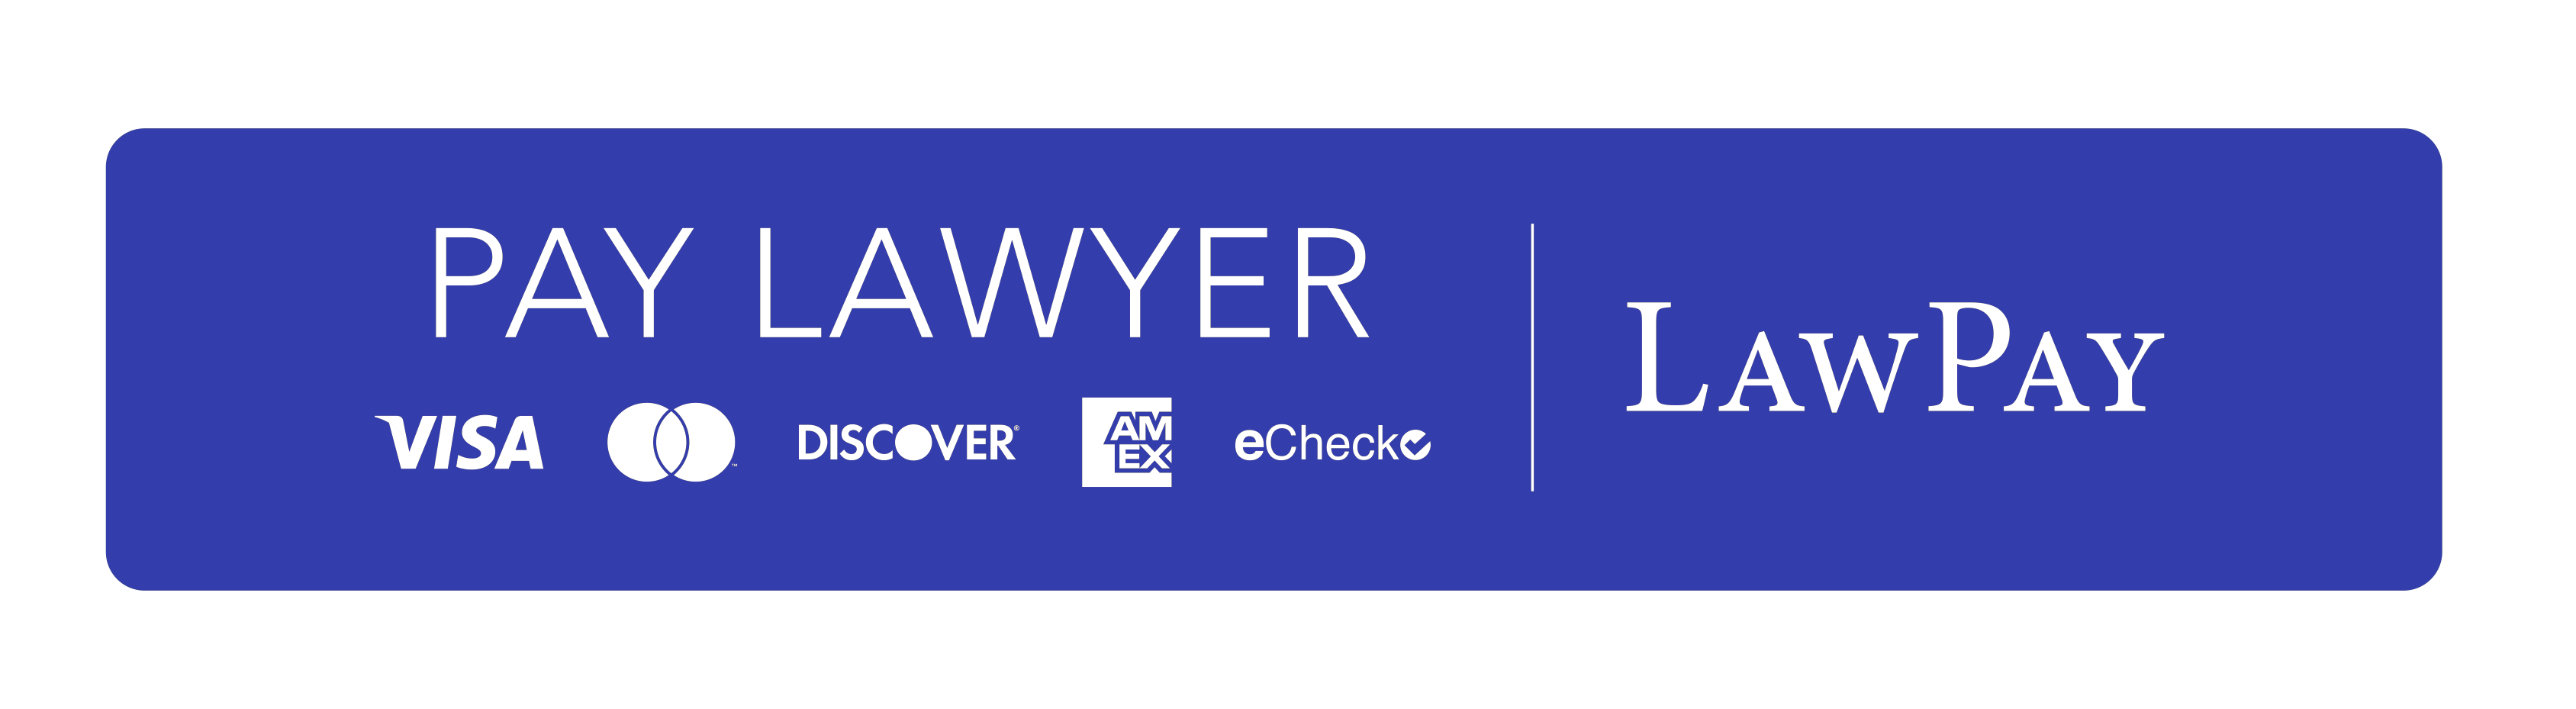 Pay Lawyer, Visa, Discover, American Express, eCheck | Law Pay